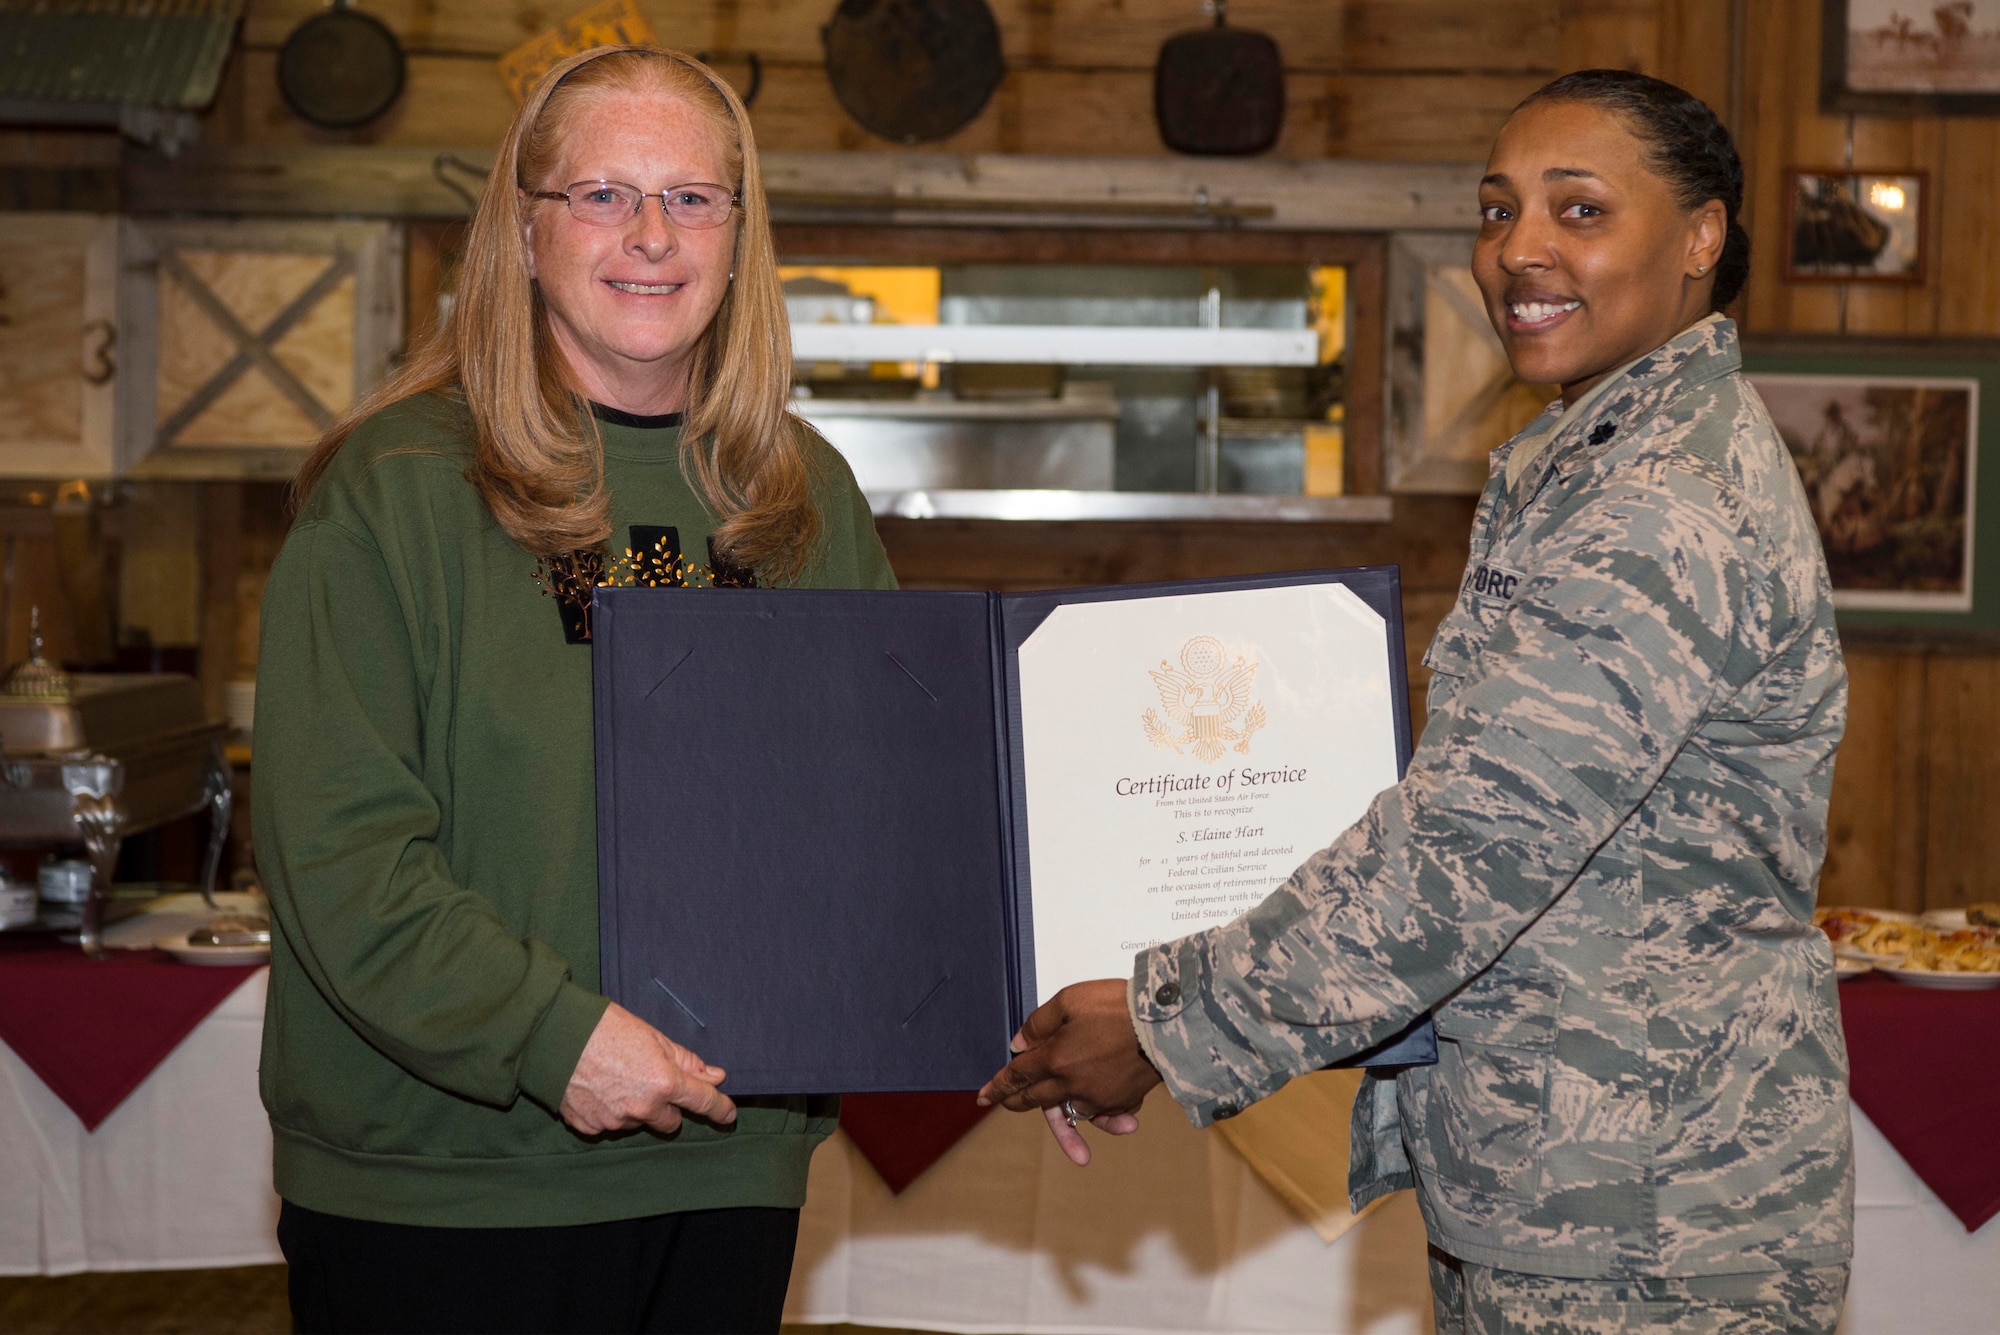 Lt. Col. Tiaundra Moncrief, 90th Missile Wing Legal Office staff judge advocate, presents Elaine Hart, 90th MW Legal Office recorder, with a Certificate of Service during her retirement ceremony at F.E. Warren Air Force Base, Wyo., April 21, 2017. The Certificate of Service is to recognize Hart’s 45 years of federal civilian service. (U.S. Air Force photo by Staff Sgt. Christopher Ruano)